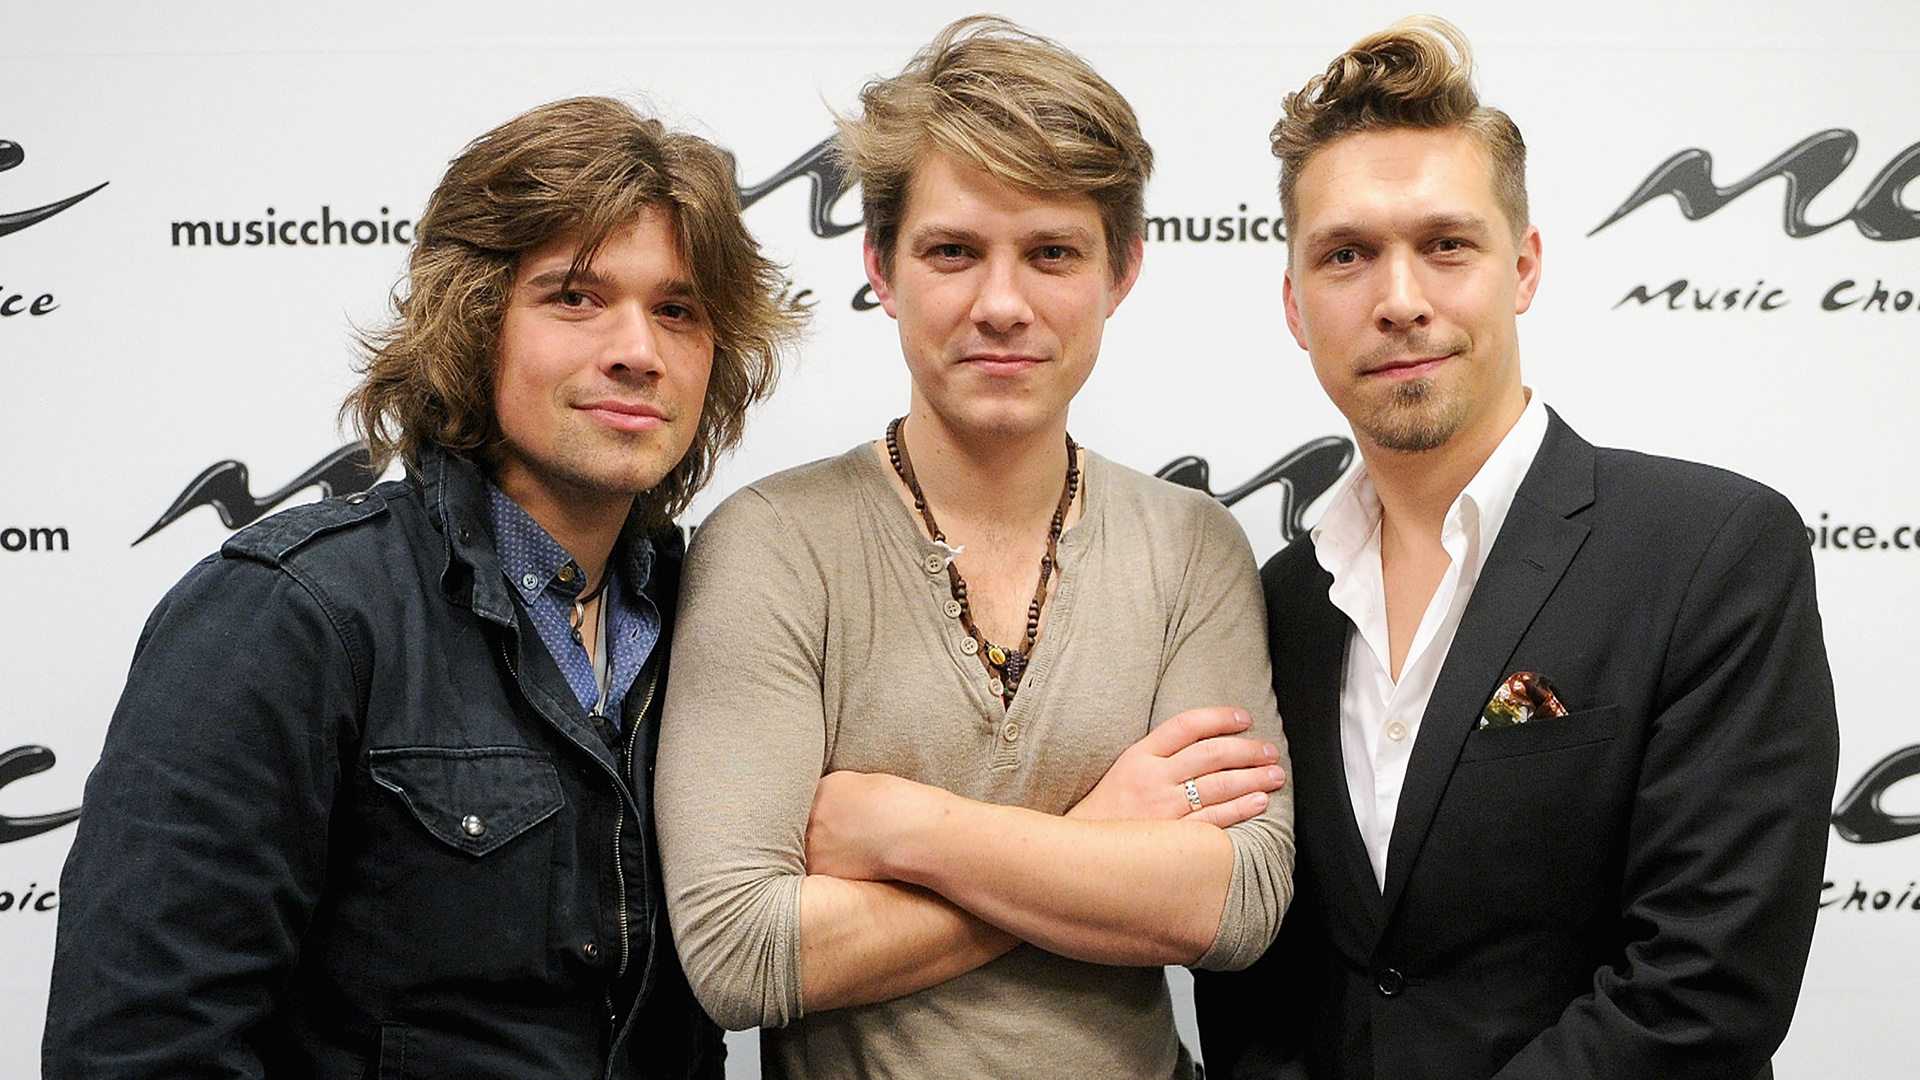 Taylor Hanson, Hanson brothers, Current whereabouts, SpikyTV feature, 1920x1080 Full HD Desktop